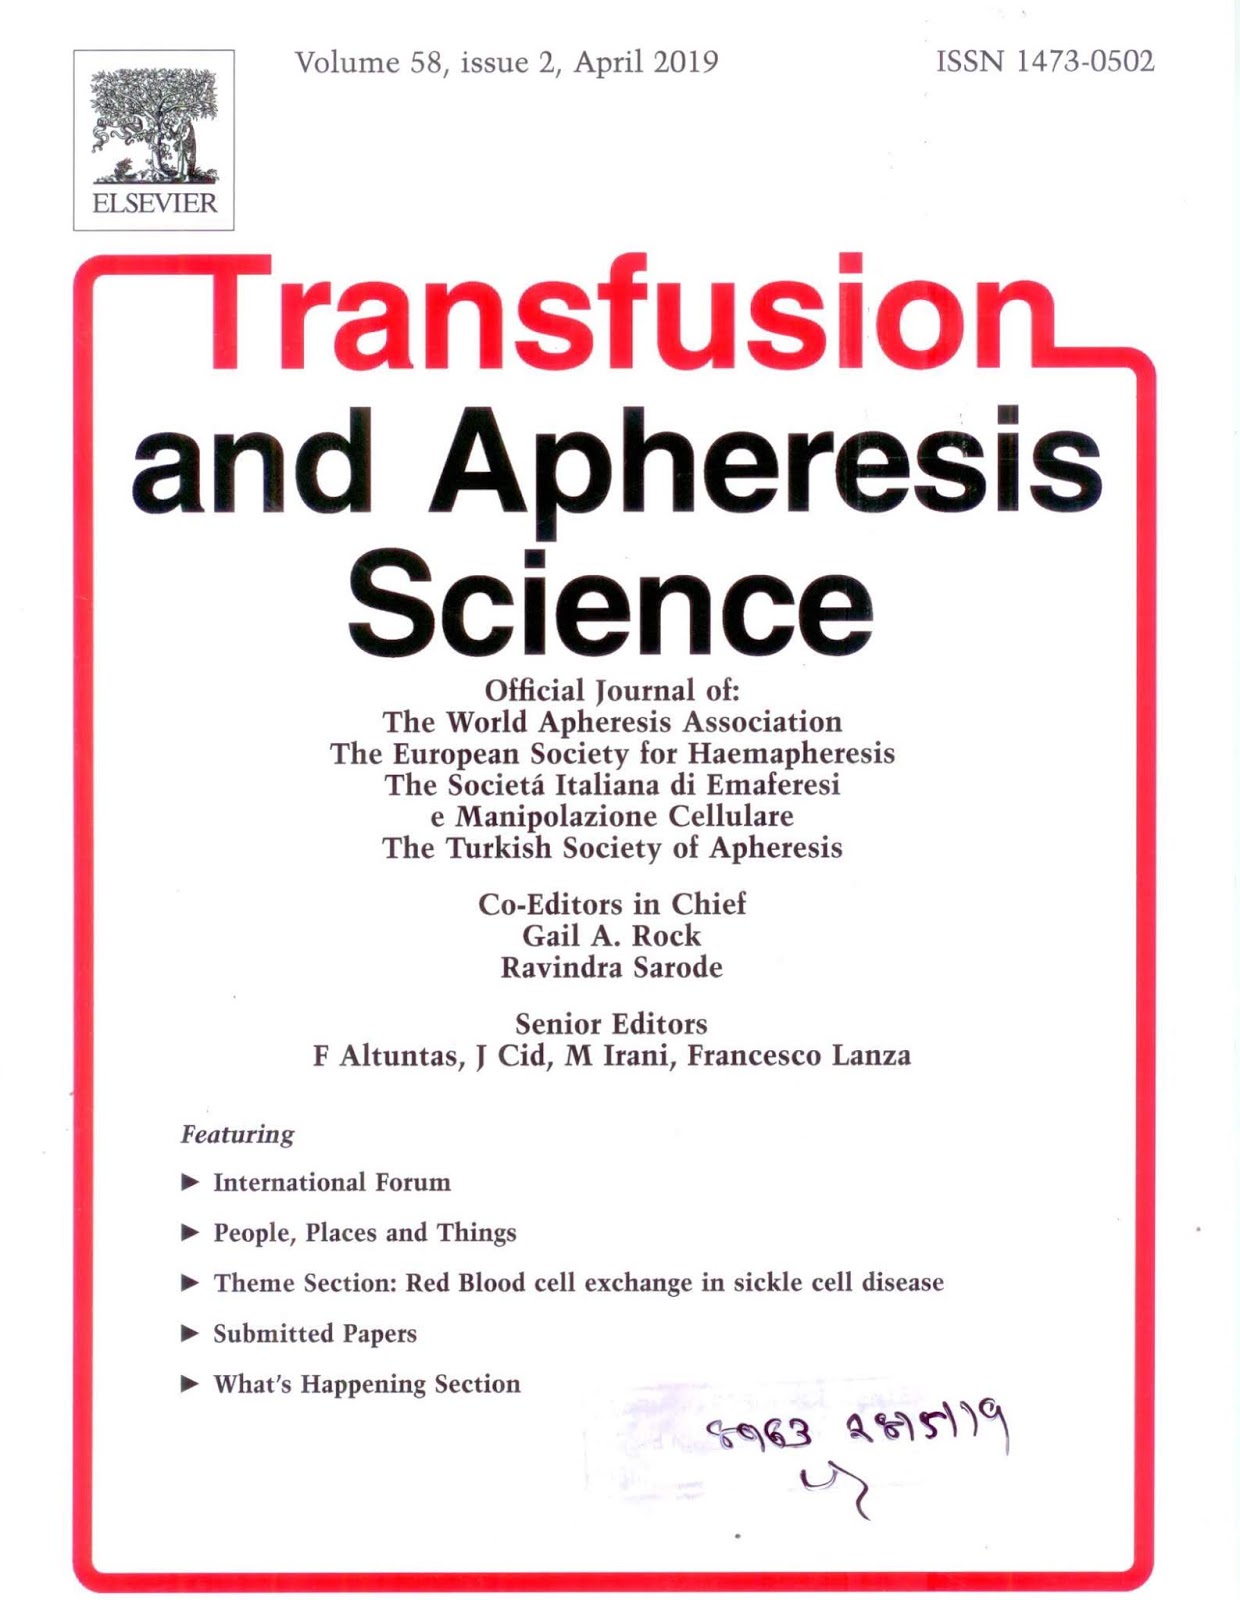 https://www.sciencedirect.com/journal/transfusion-and-apheresis-science/vol/58/issue/2